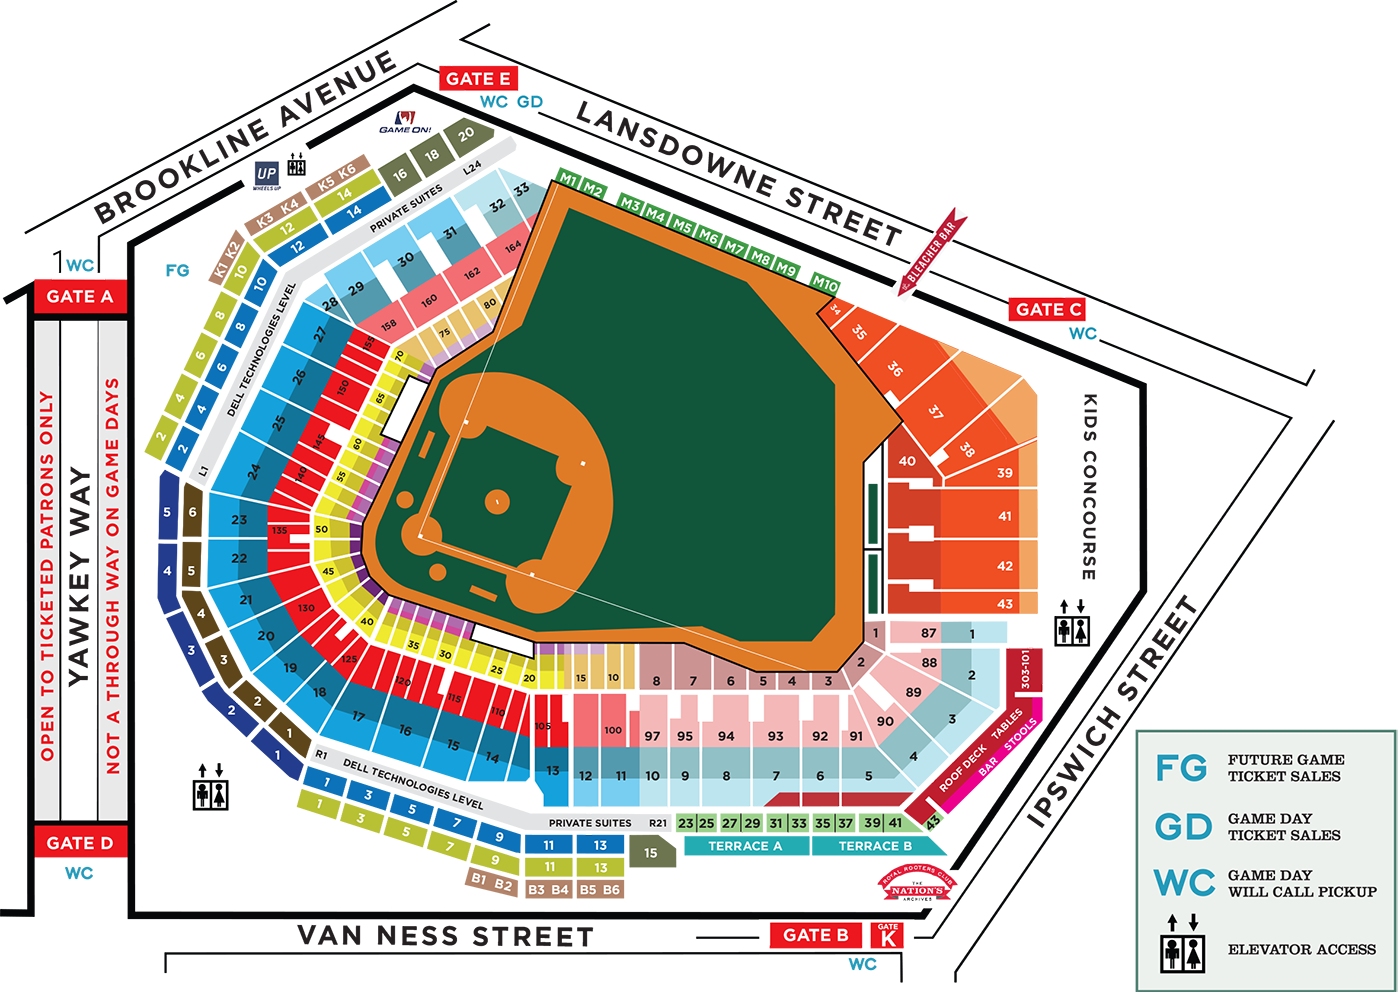 fenway park seating chart - Fenway Park Seating Map Boston Red Sox MLB